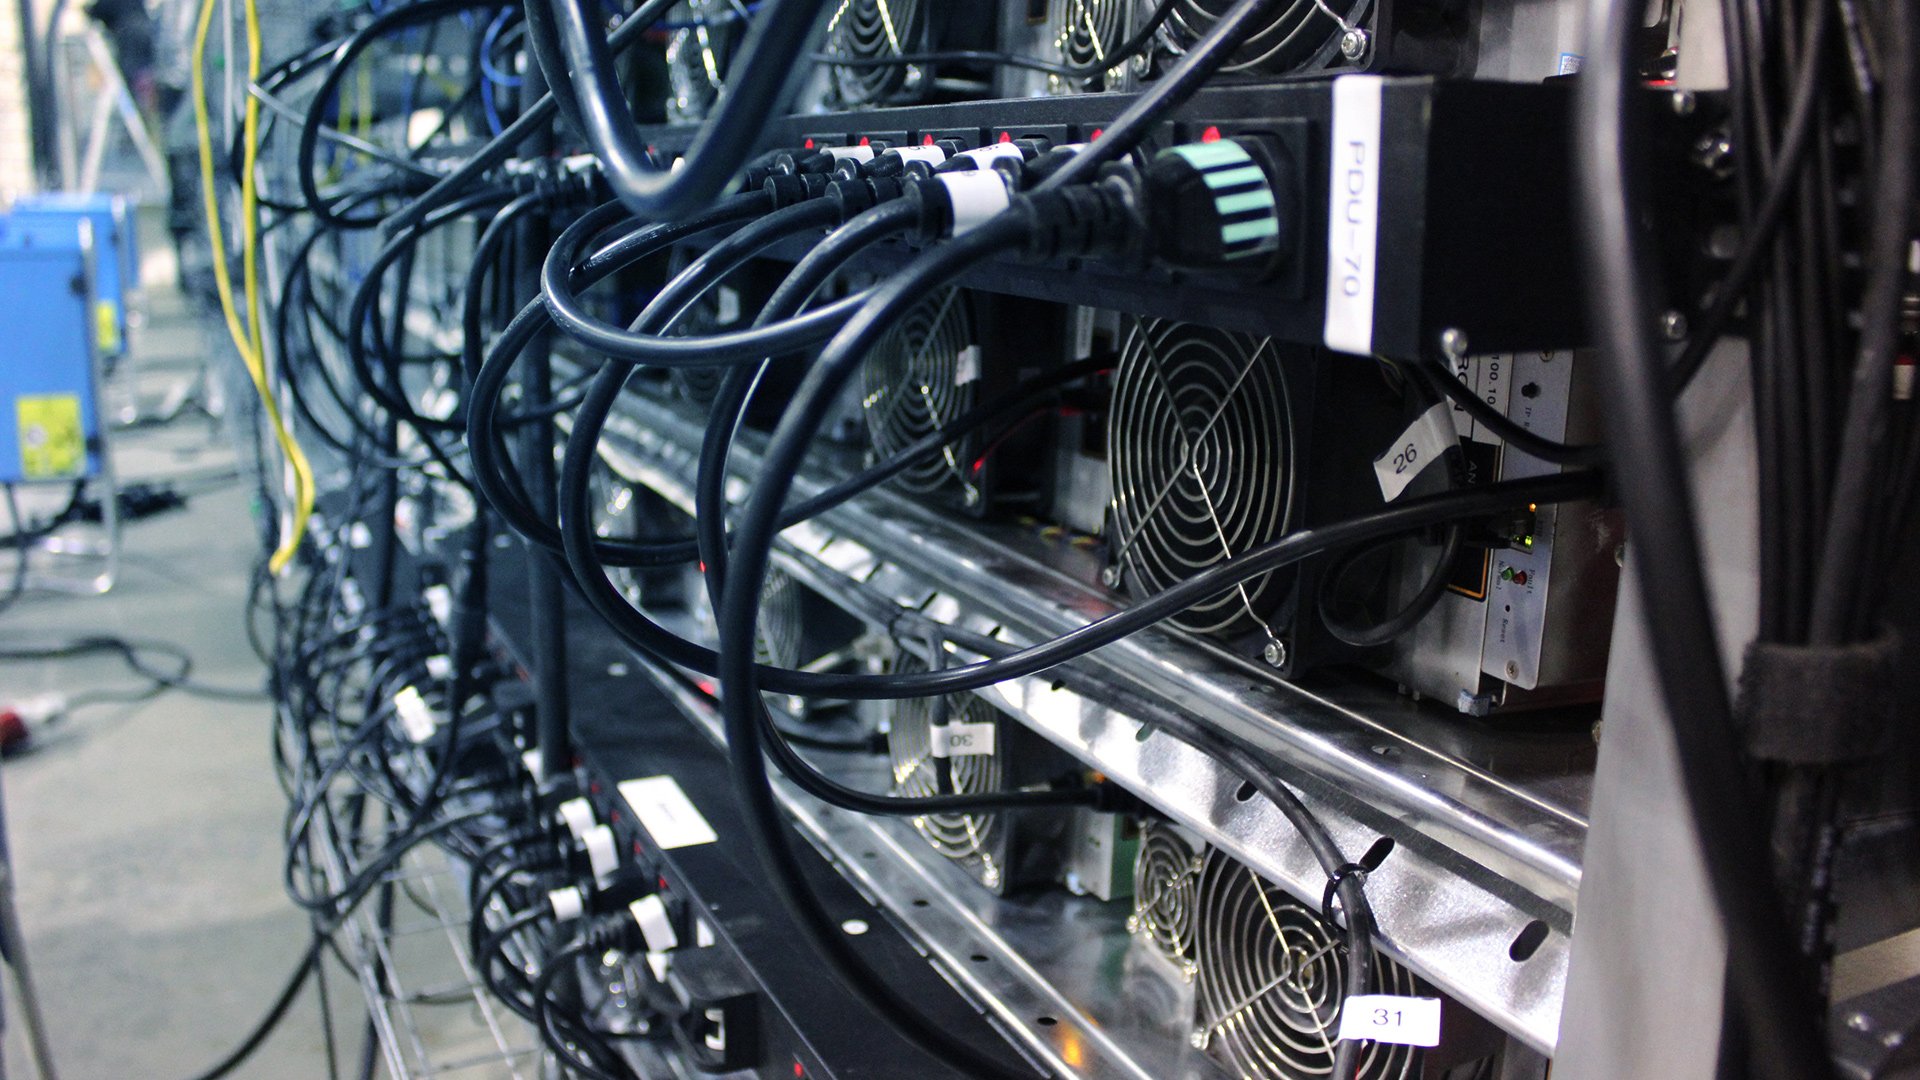 Riot Blockchain to spend $138.5 million on bitcoin mining hardware, with shipments scheduled through October 2022